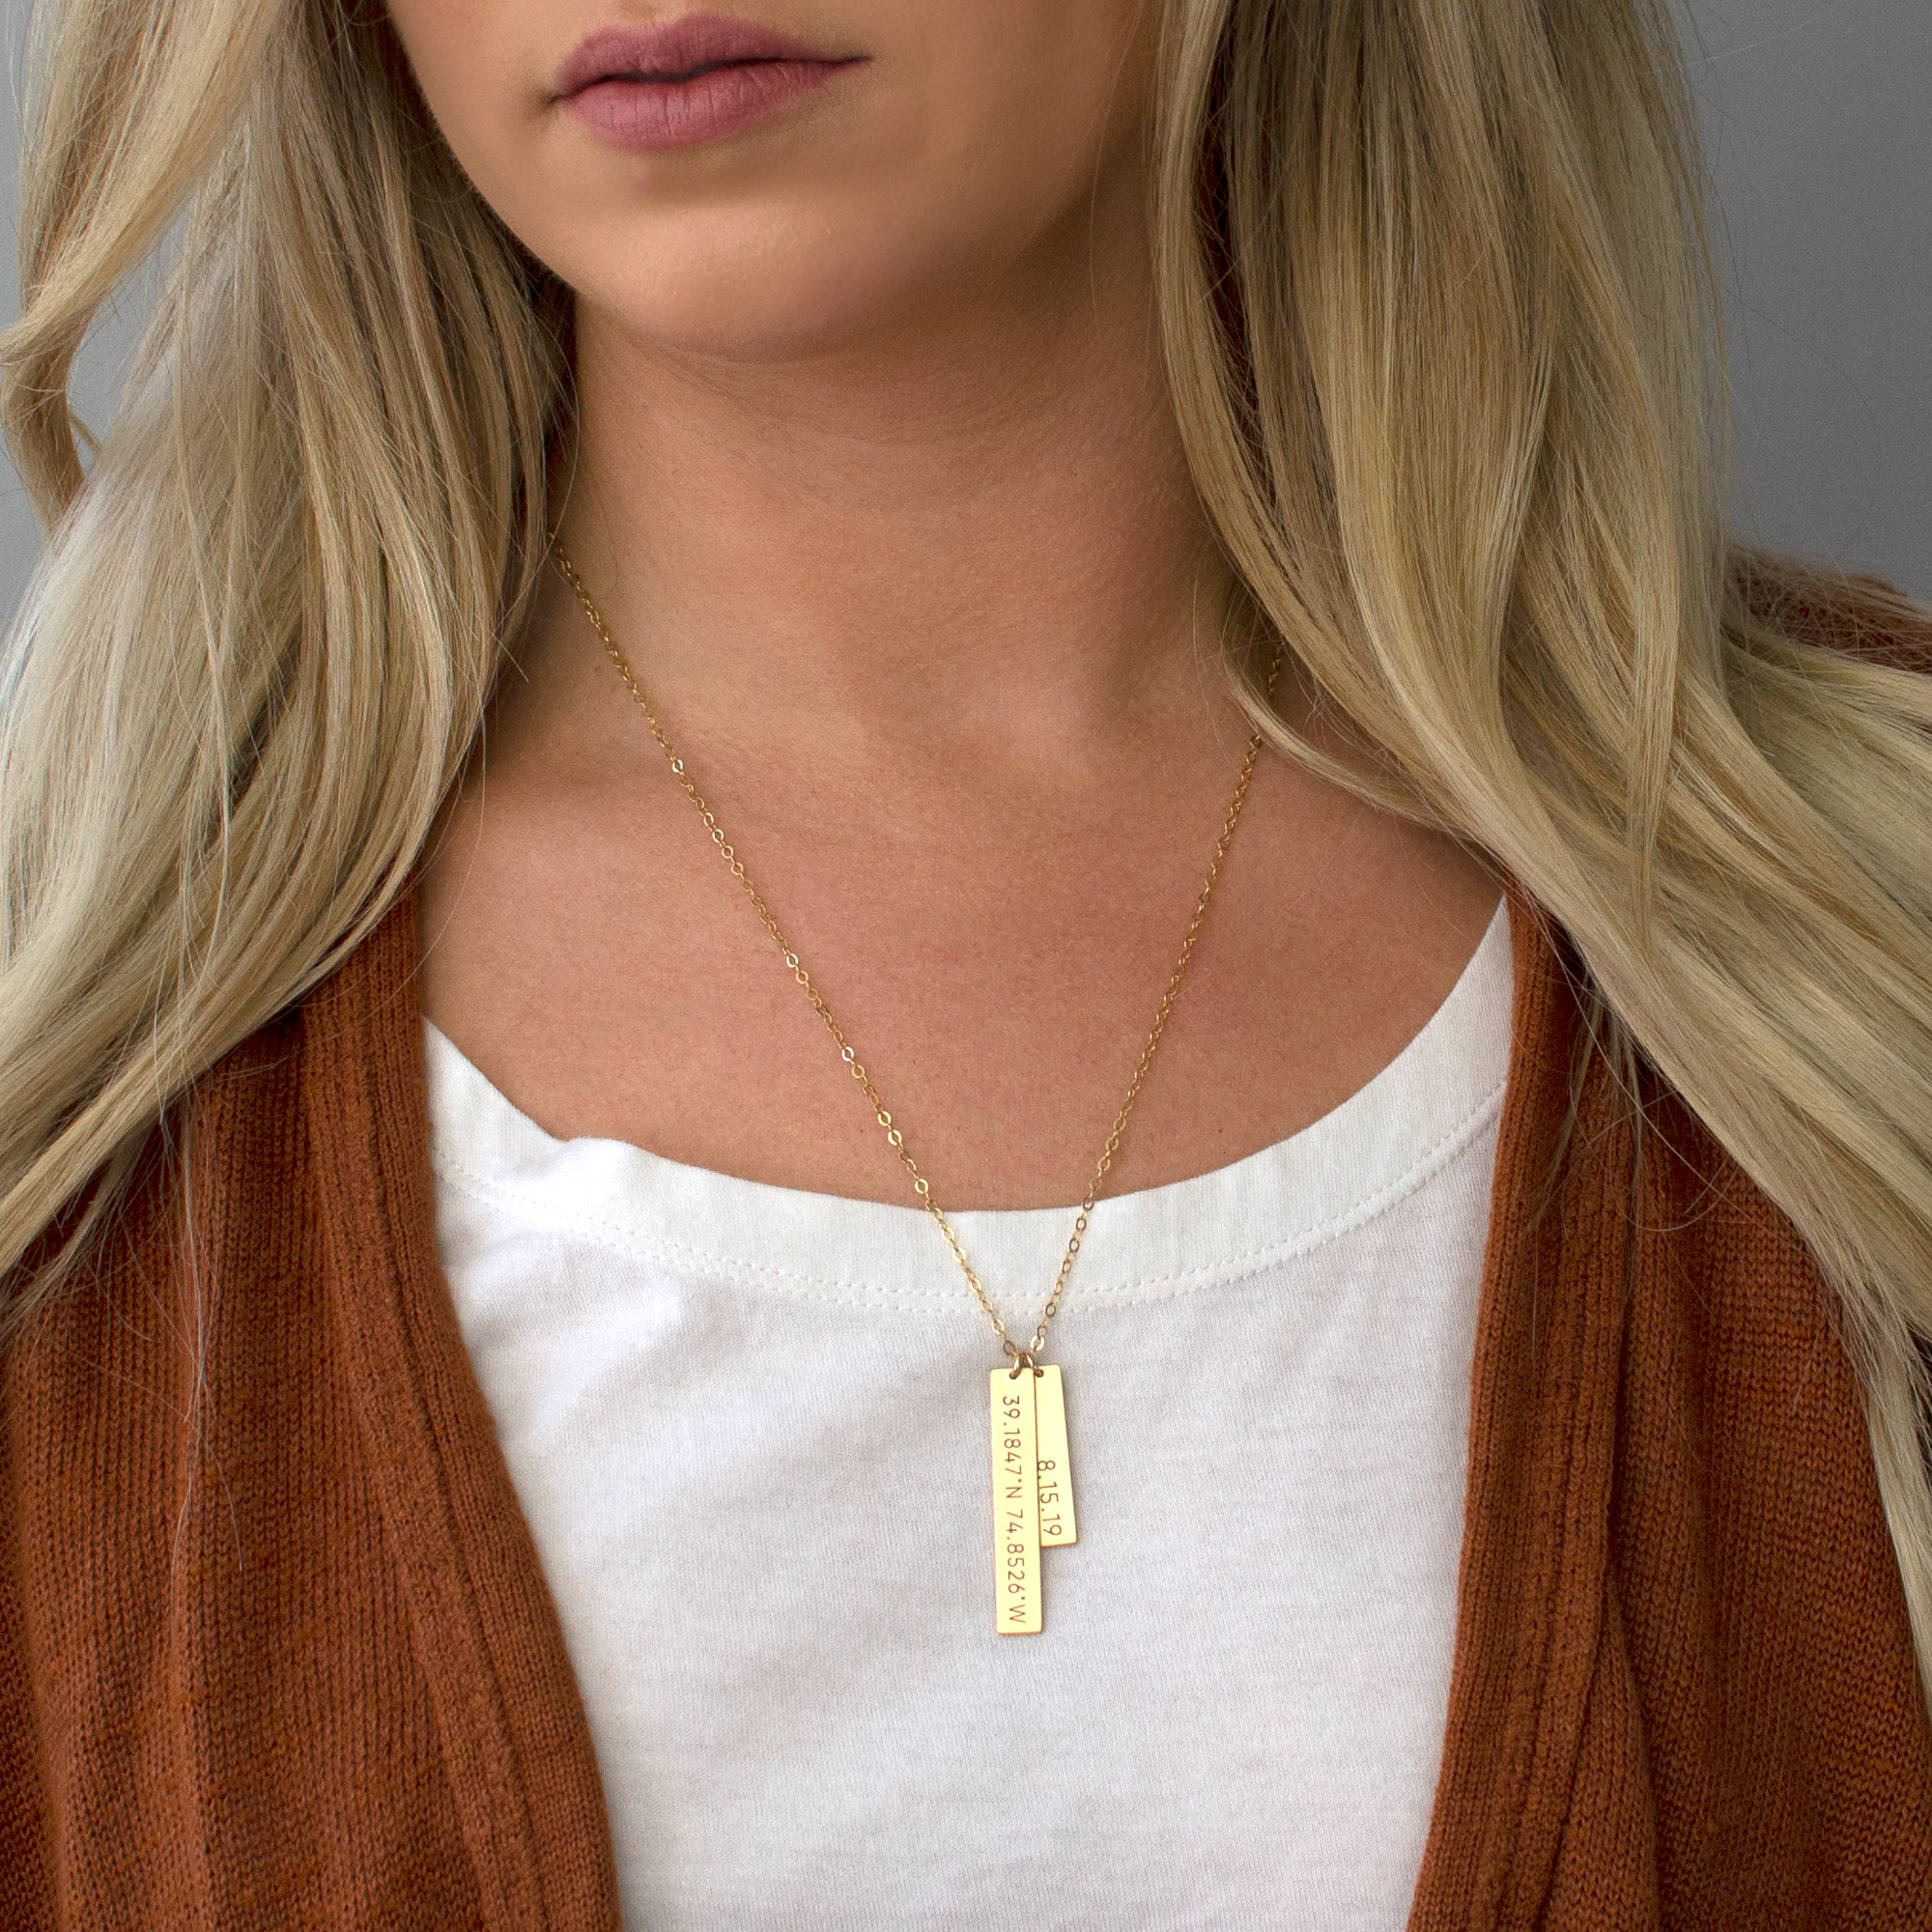 Horizontal Gold Bar Date Necklace - Roman Numeral Date Necklace - Nadin Art  Design - Personalized Jewelry